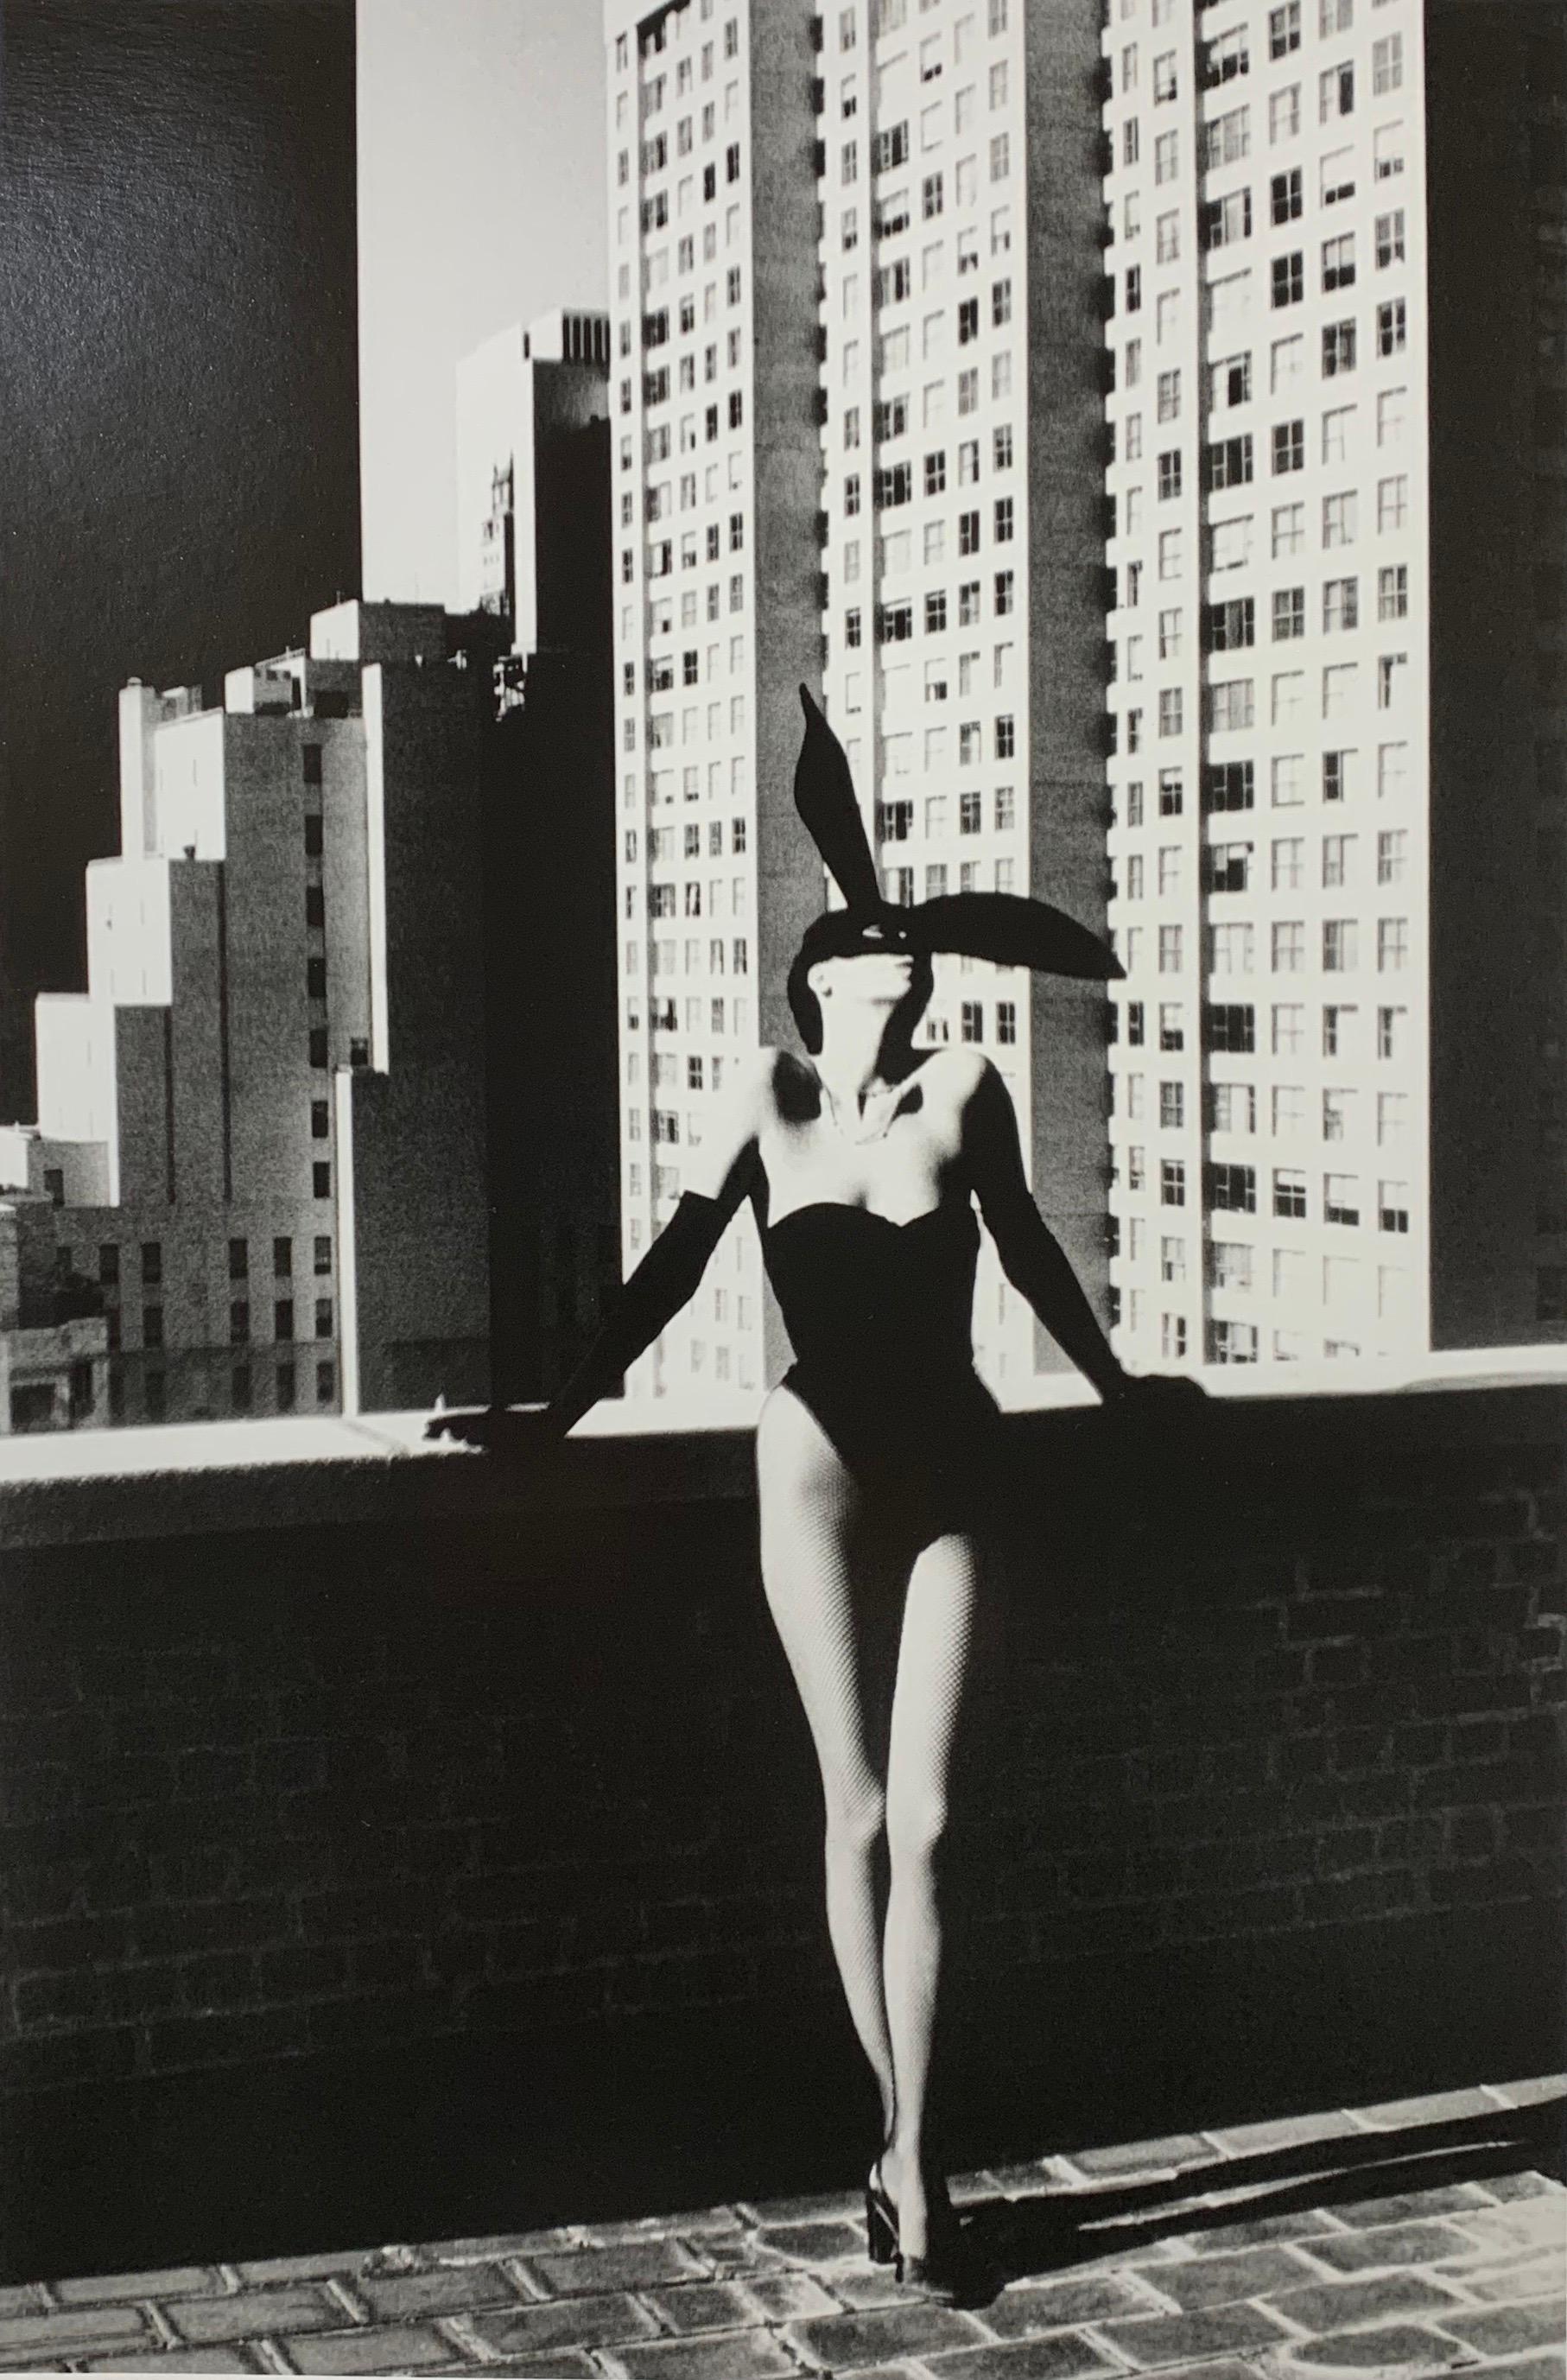 Rare vintage silver gelatin print featuring "Elsa Peretti, New York, 1975 by Helmut Newton.  Perhaps Newton’s most iconic work that followed on from the work he did for Playboy featuring Peretti in a Halston designer costume with bunny ears is a